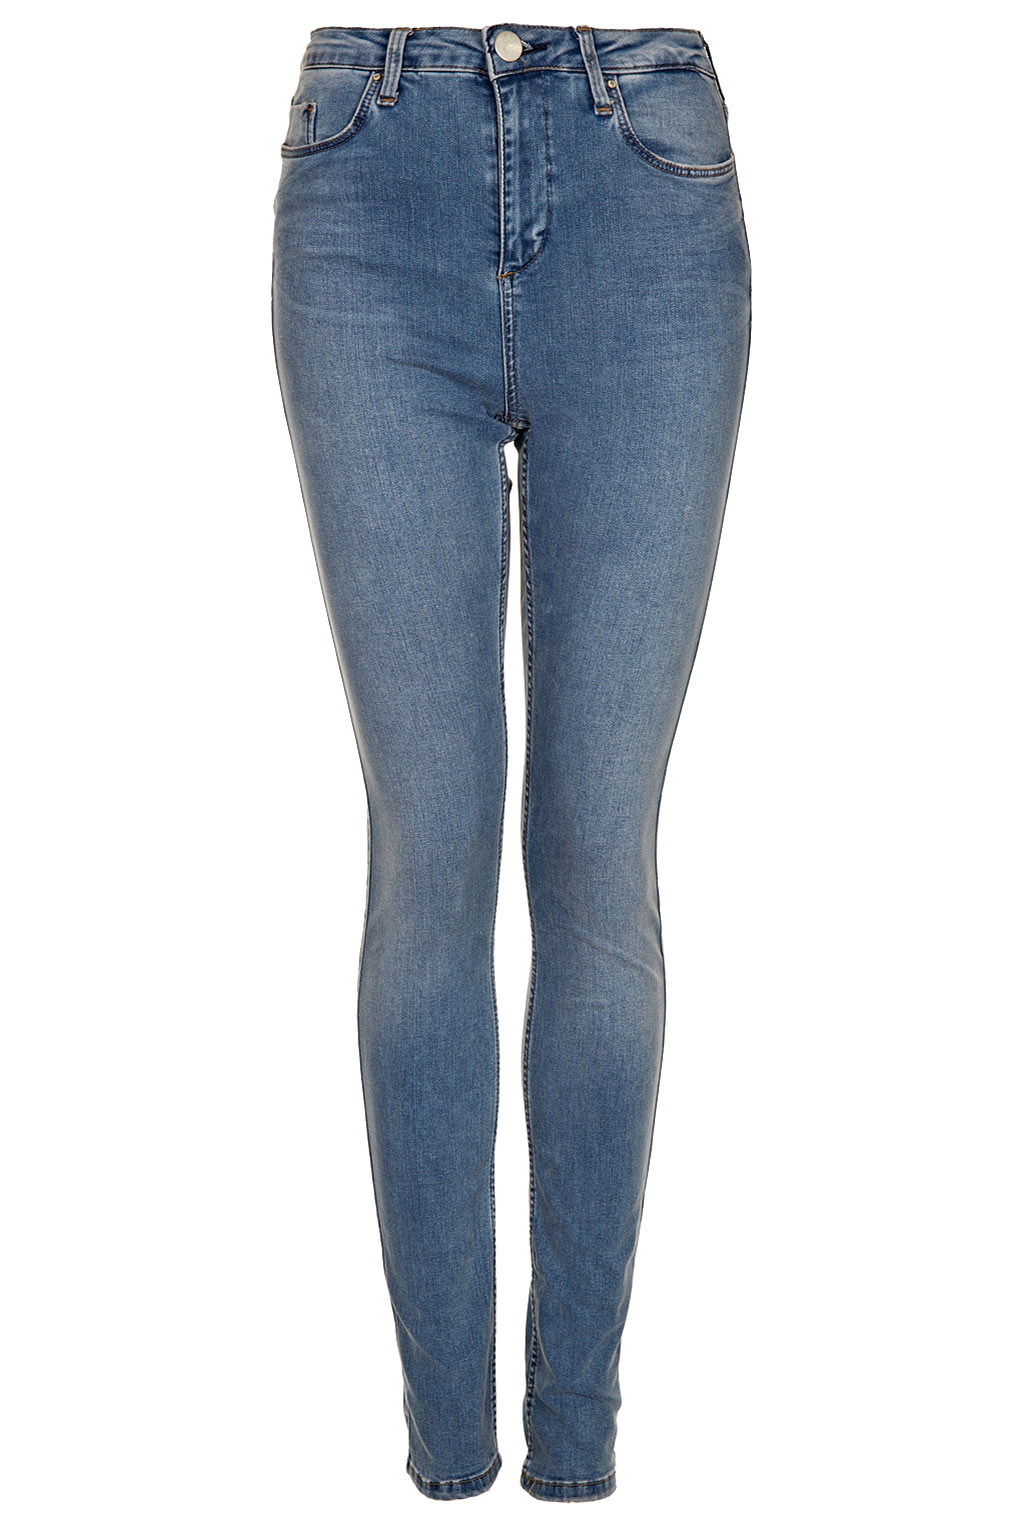 Topshop Tall Moto Vintage Jamie Jeans in Blue (light stone) | Lyst